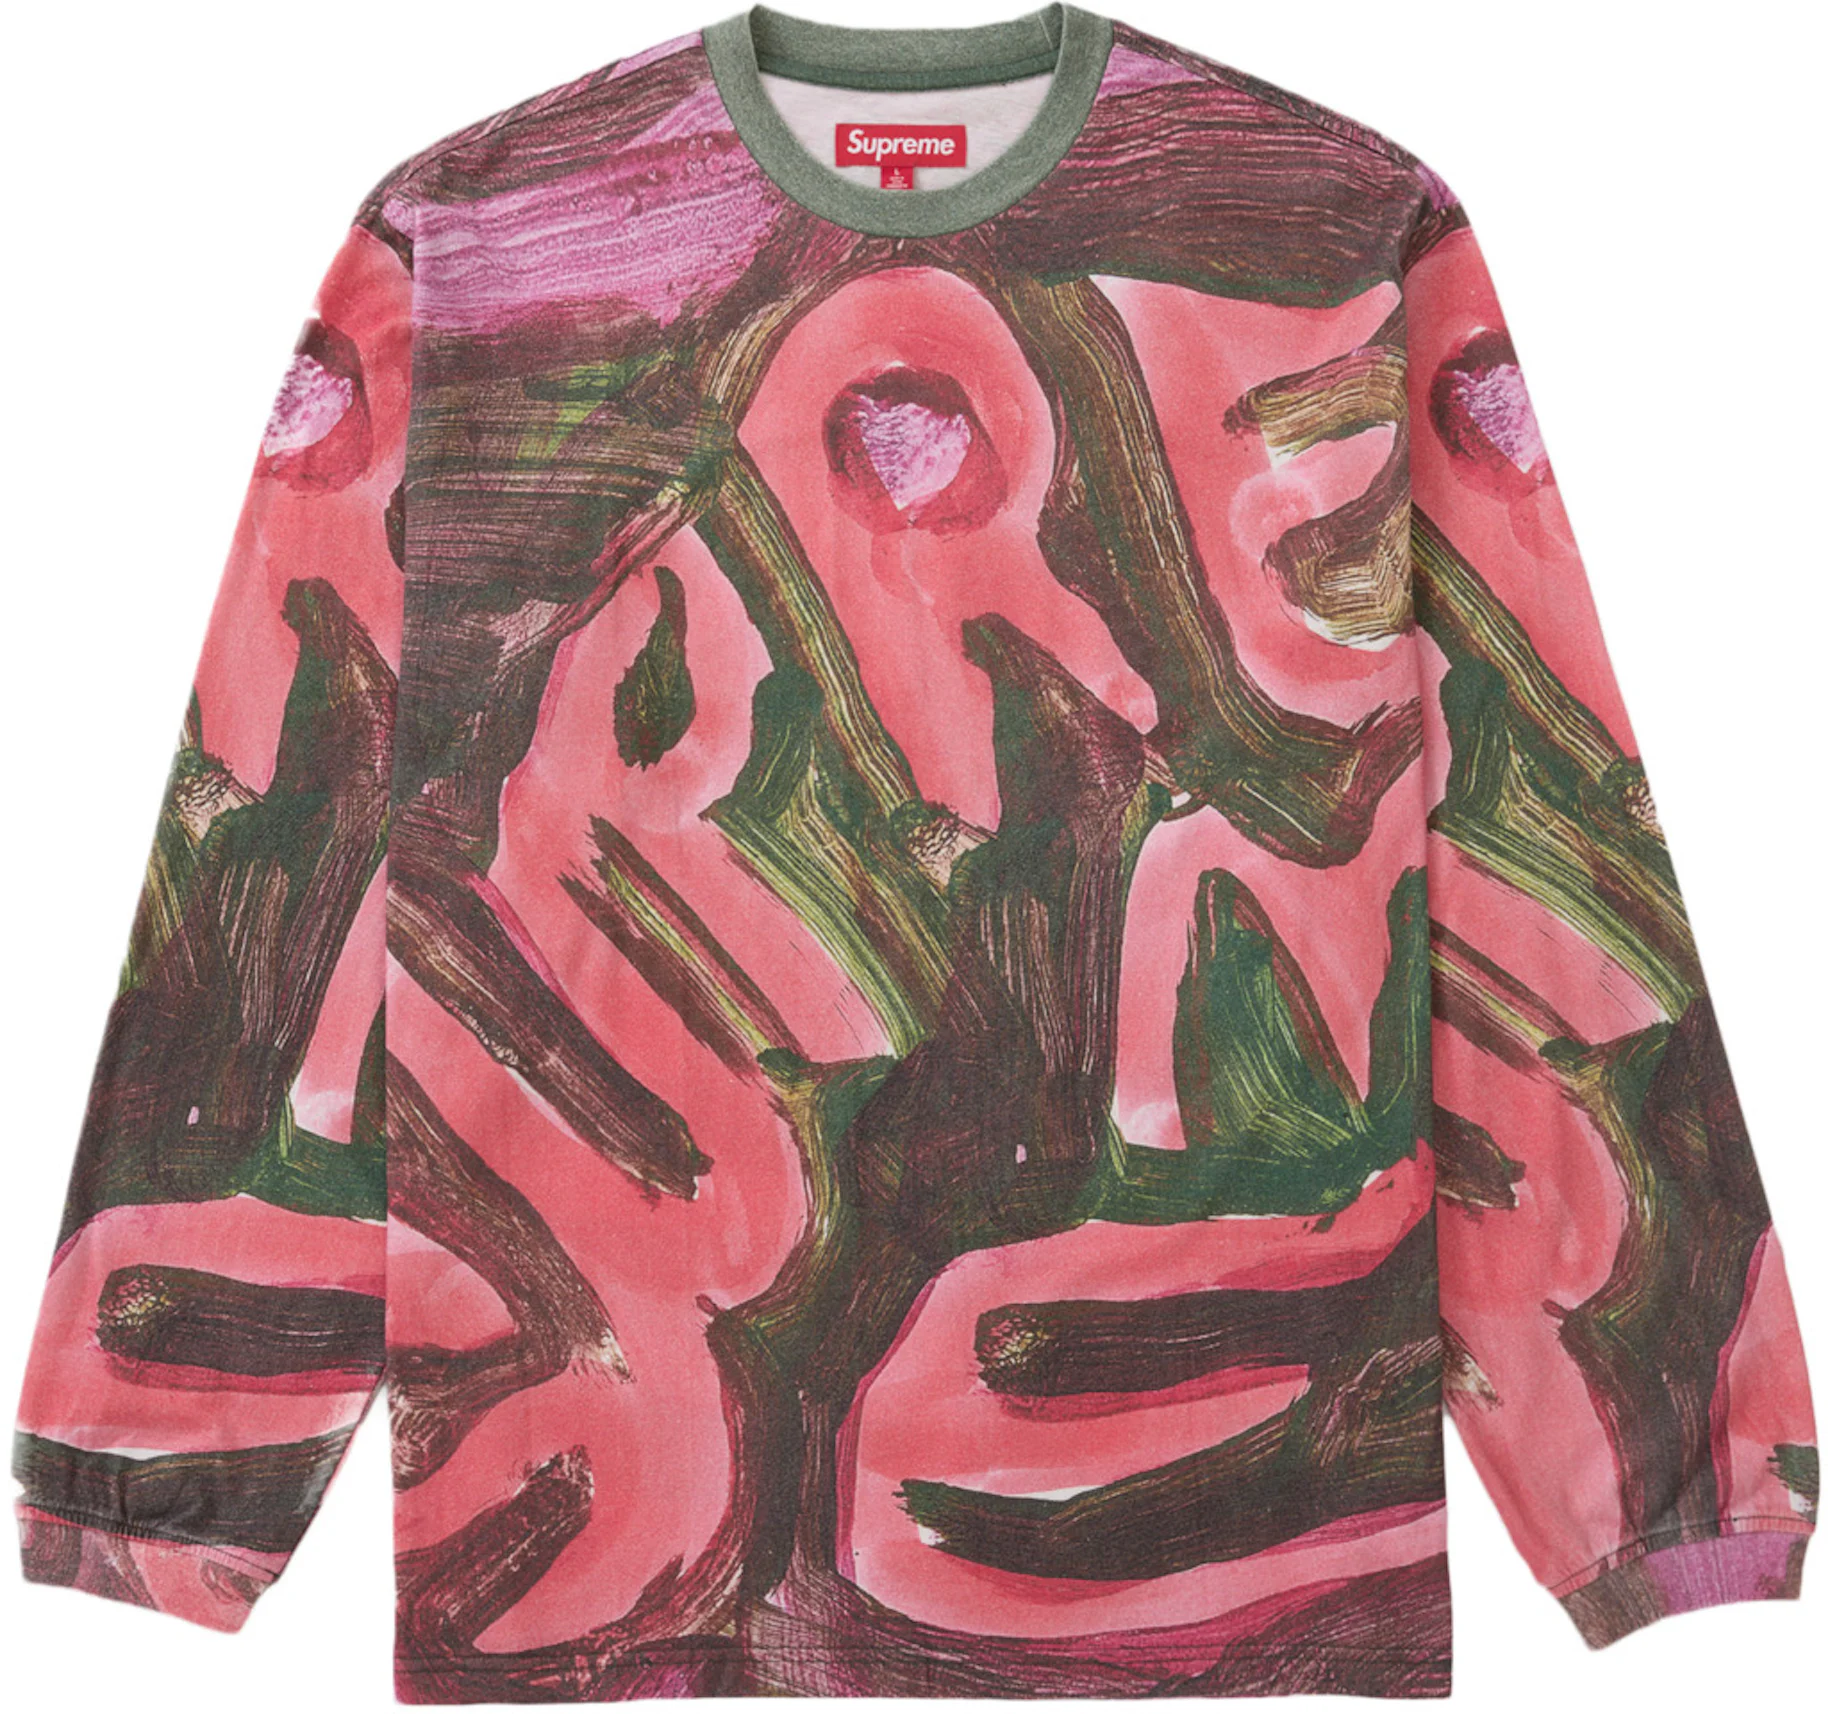 Supreme x Pink Panther Allover Print S/S Size Medium Rare SS14 T-Shirt  Green